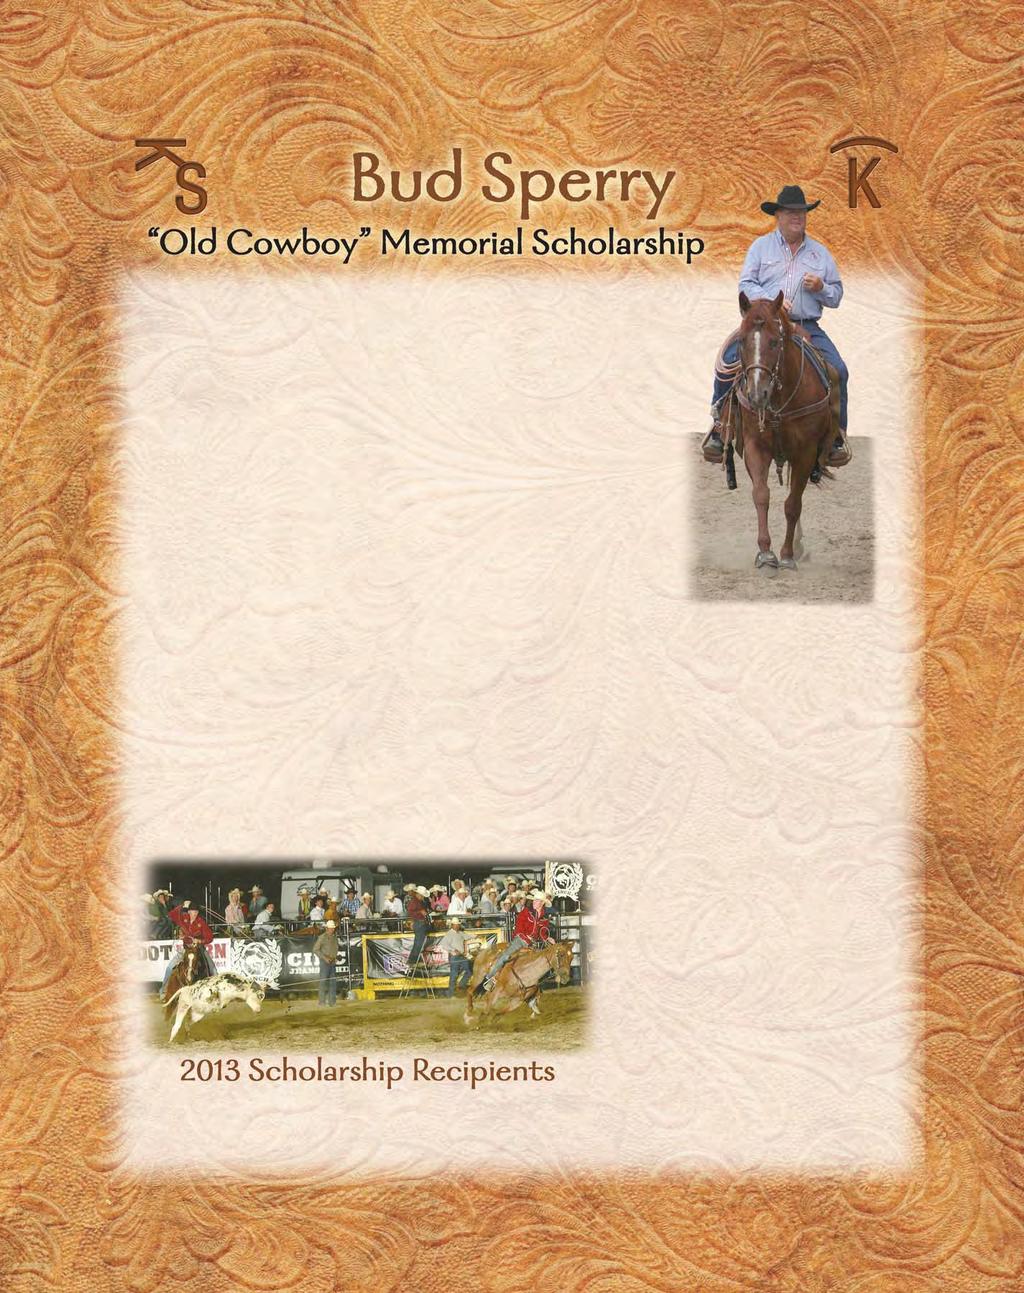 The family of Kyle Bud Sperry Jr. established a memorial scholarship in Bud s honor.